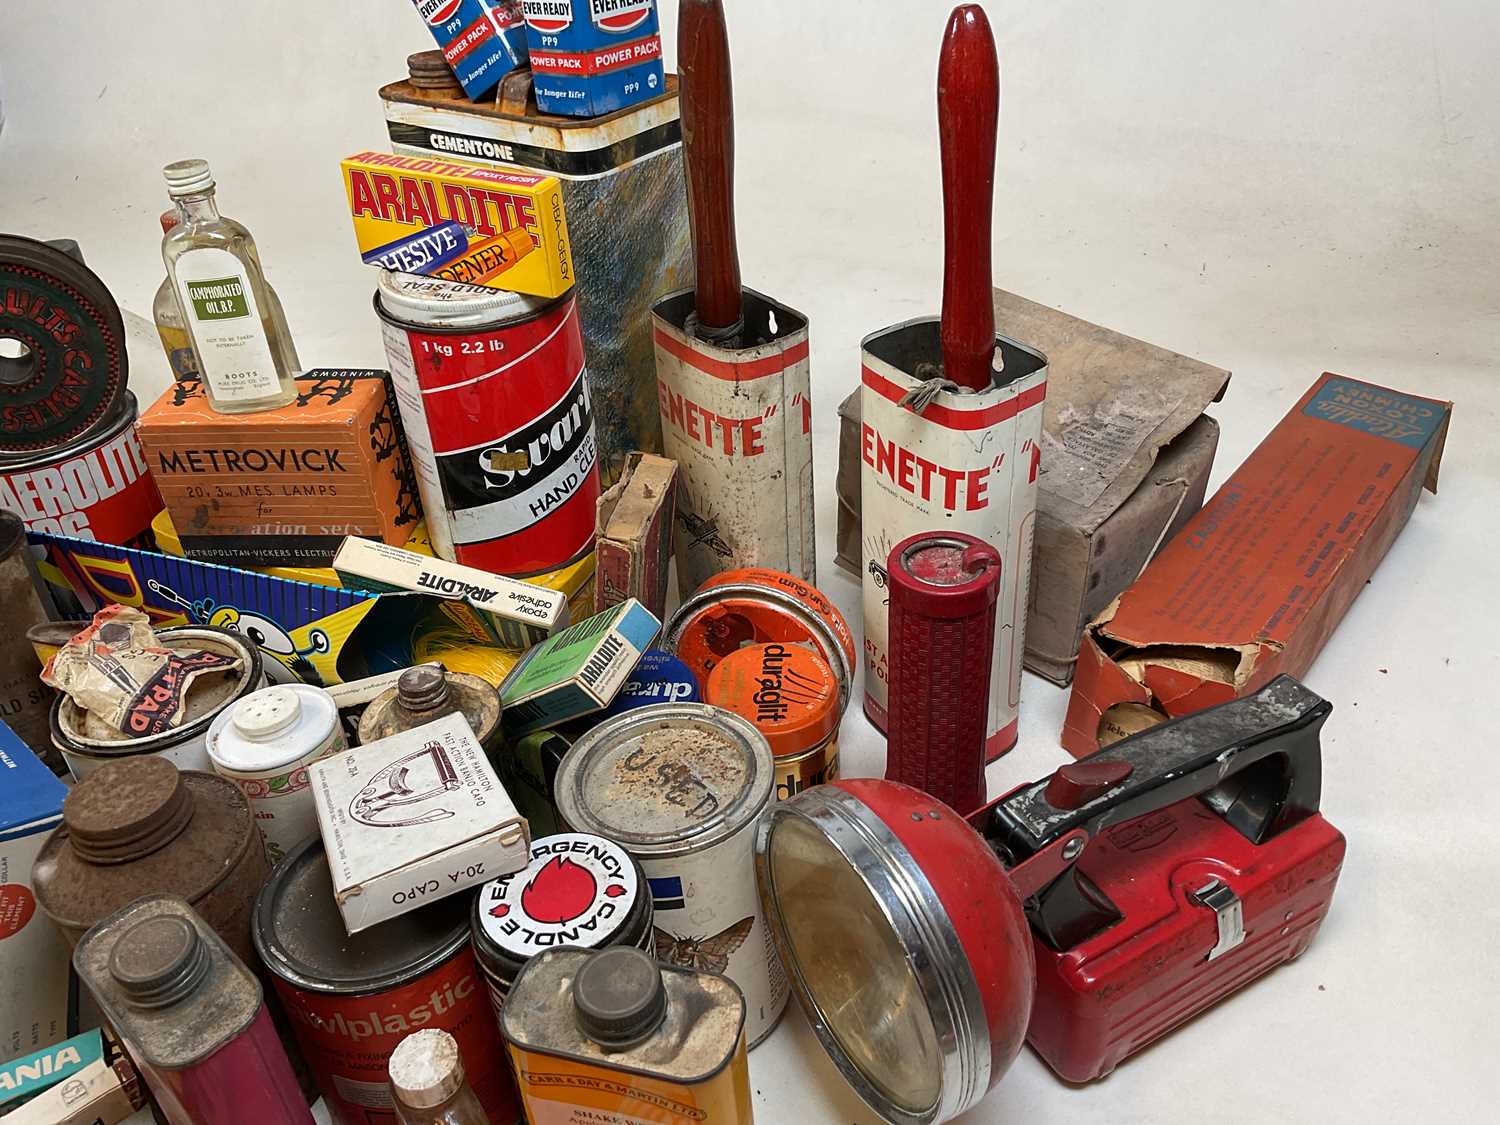 A collection of vintage tins and workshop finds including torches, car components, light bulbs, - Image 5 of 6